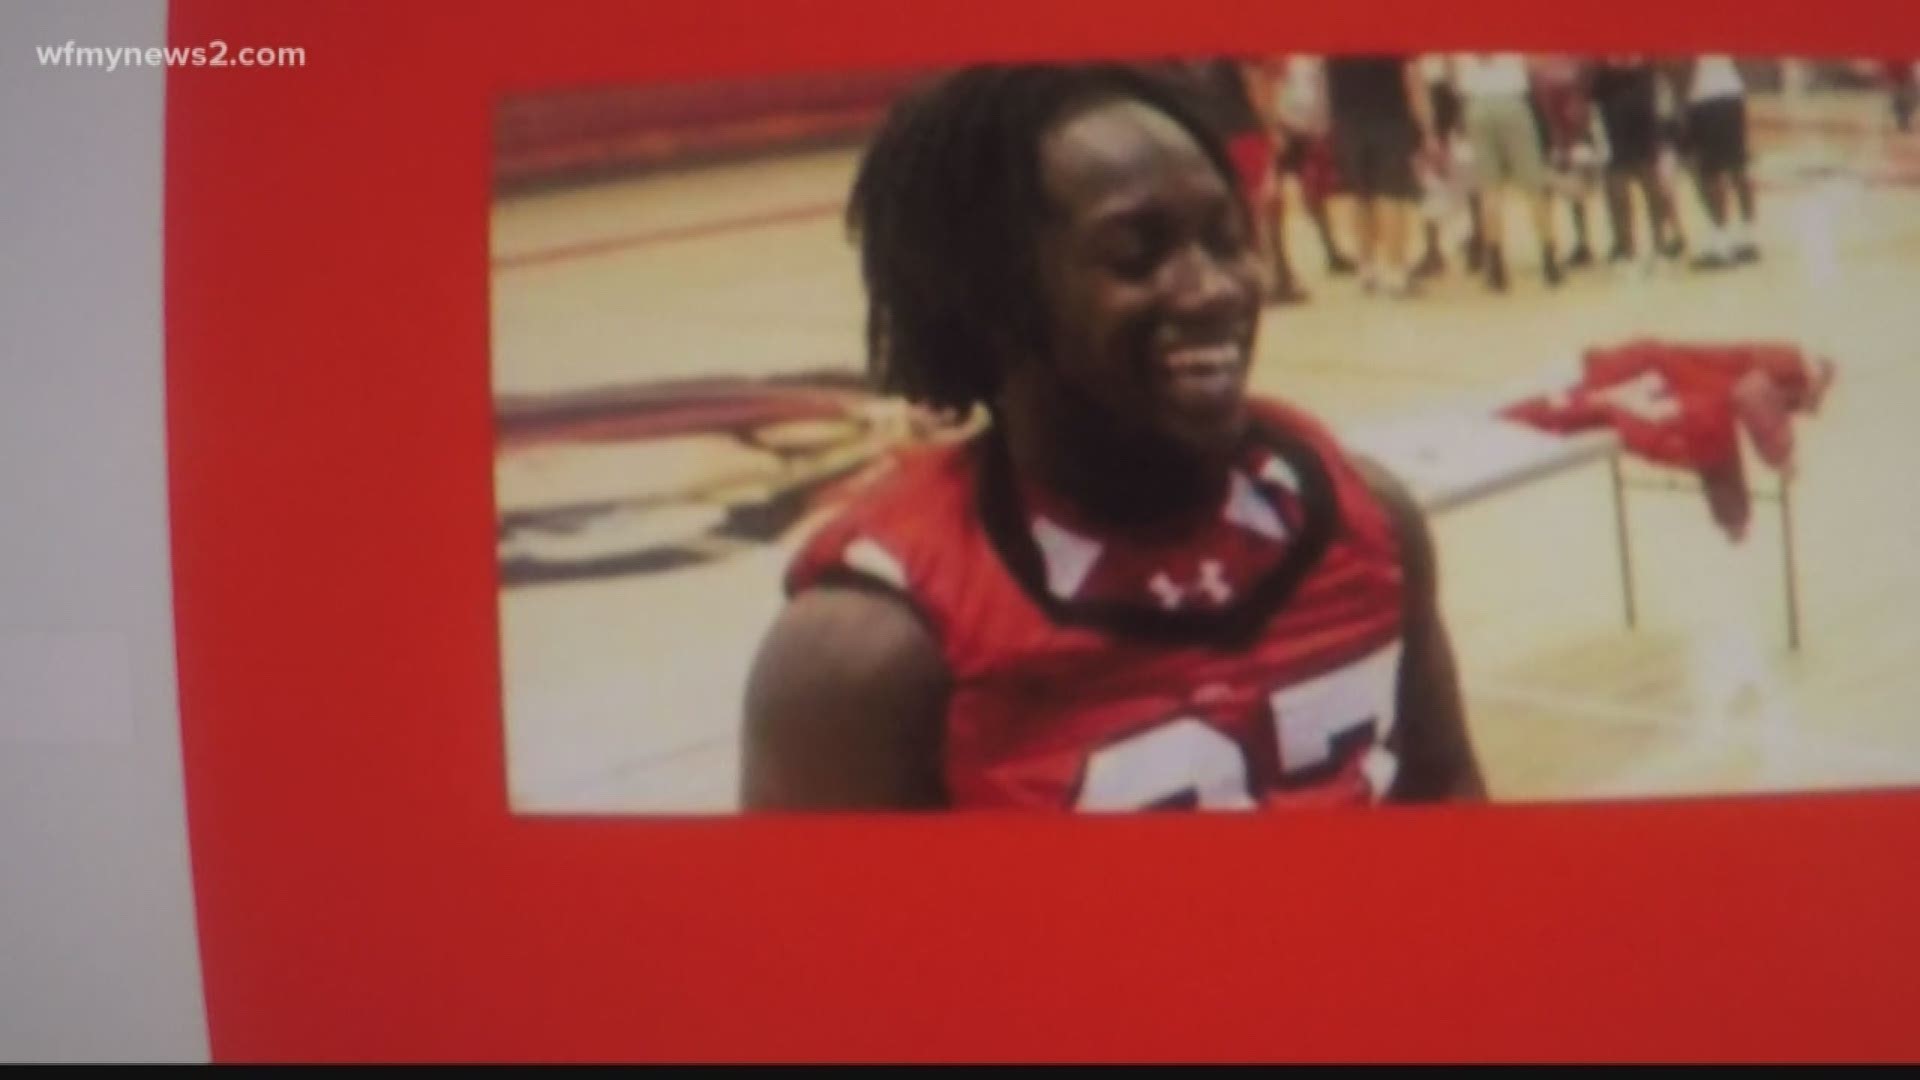 Page High school football star Sincere Davis died Tuesday,10 days after someone shot him.